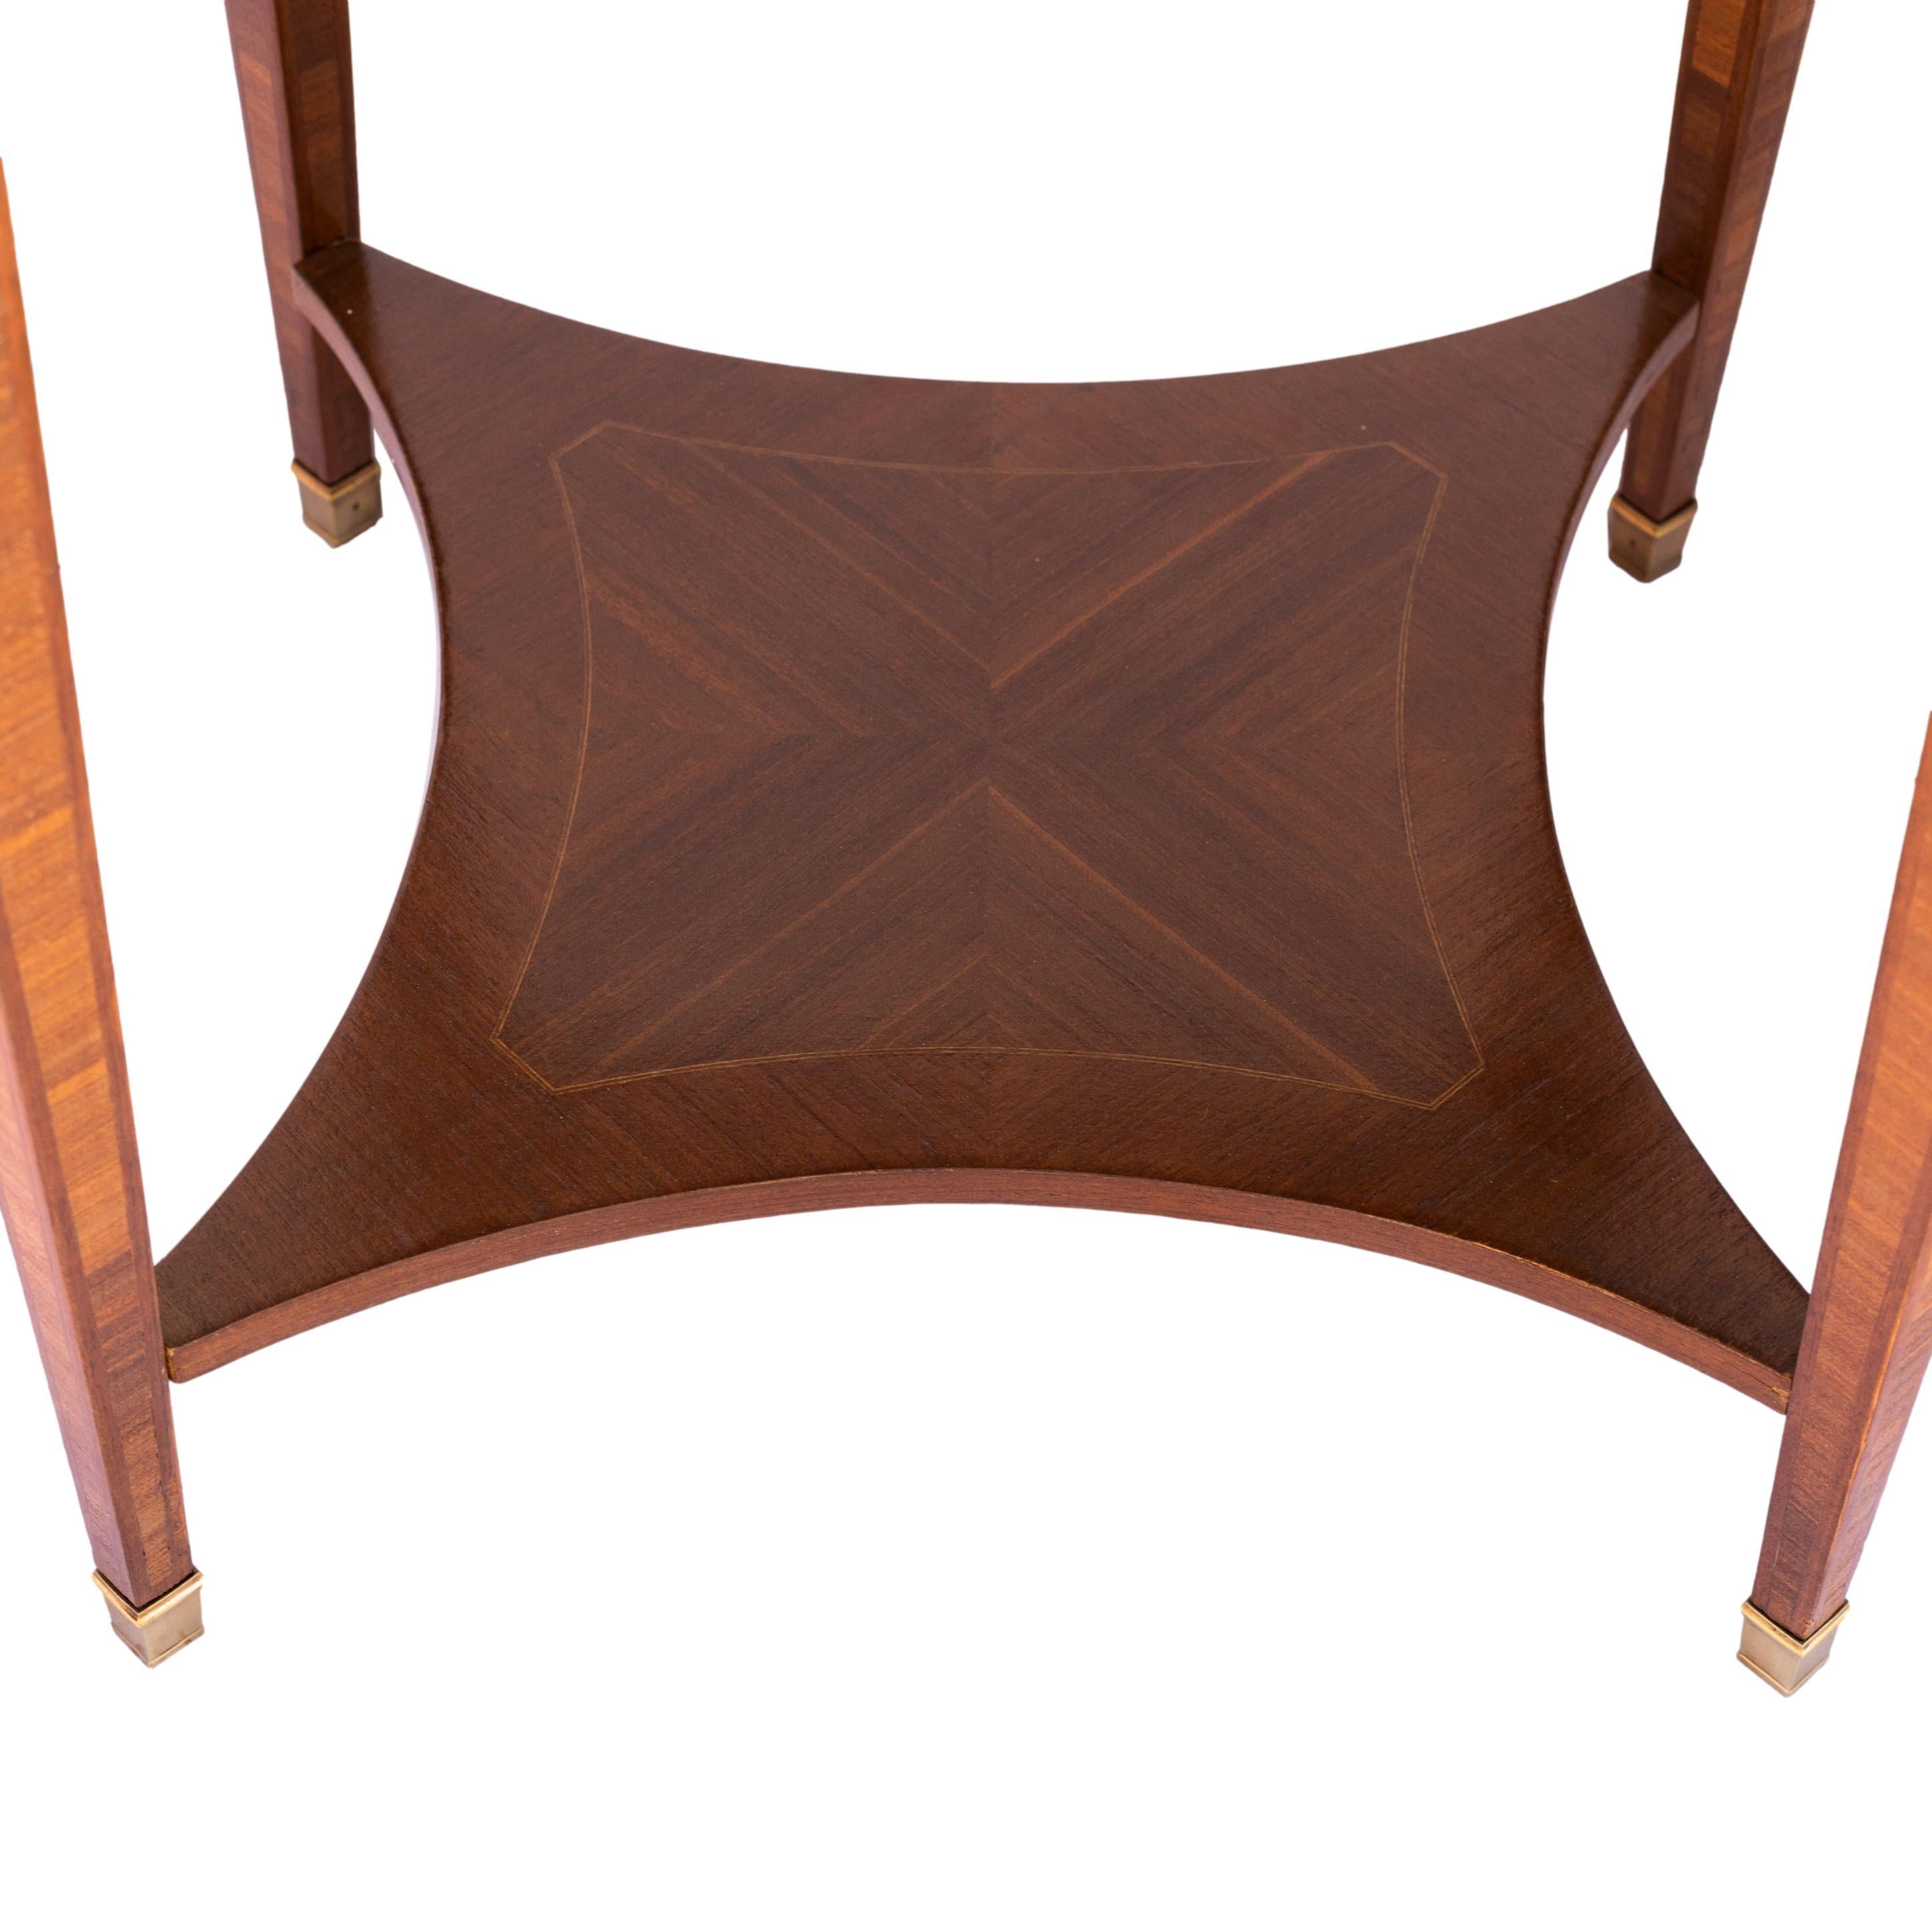 Pair of Directoire-Style Mahogany Side Tables, Leather Top, French, ca. 1920  For Sale 2